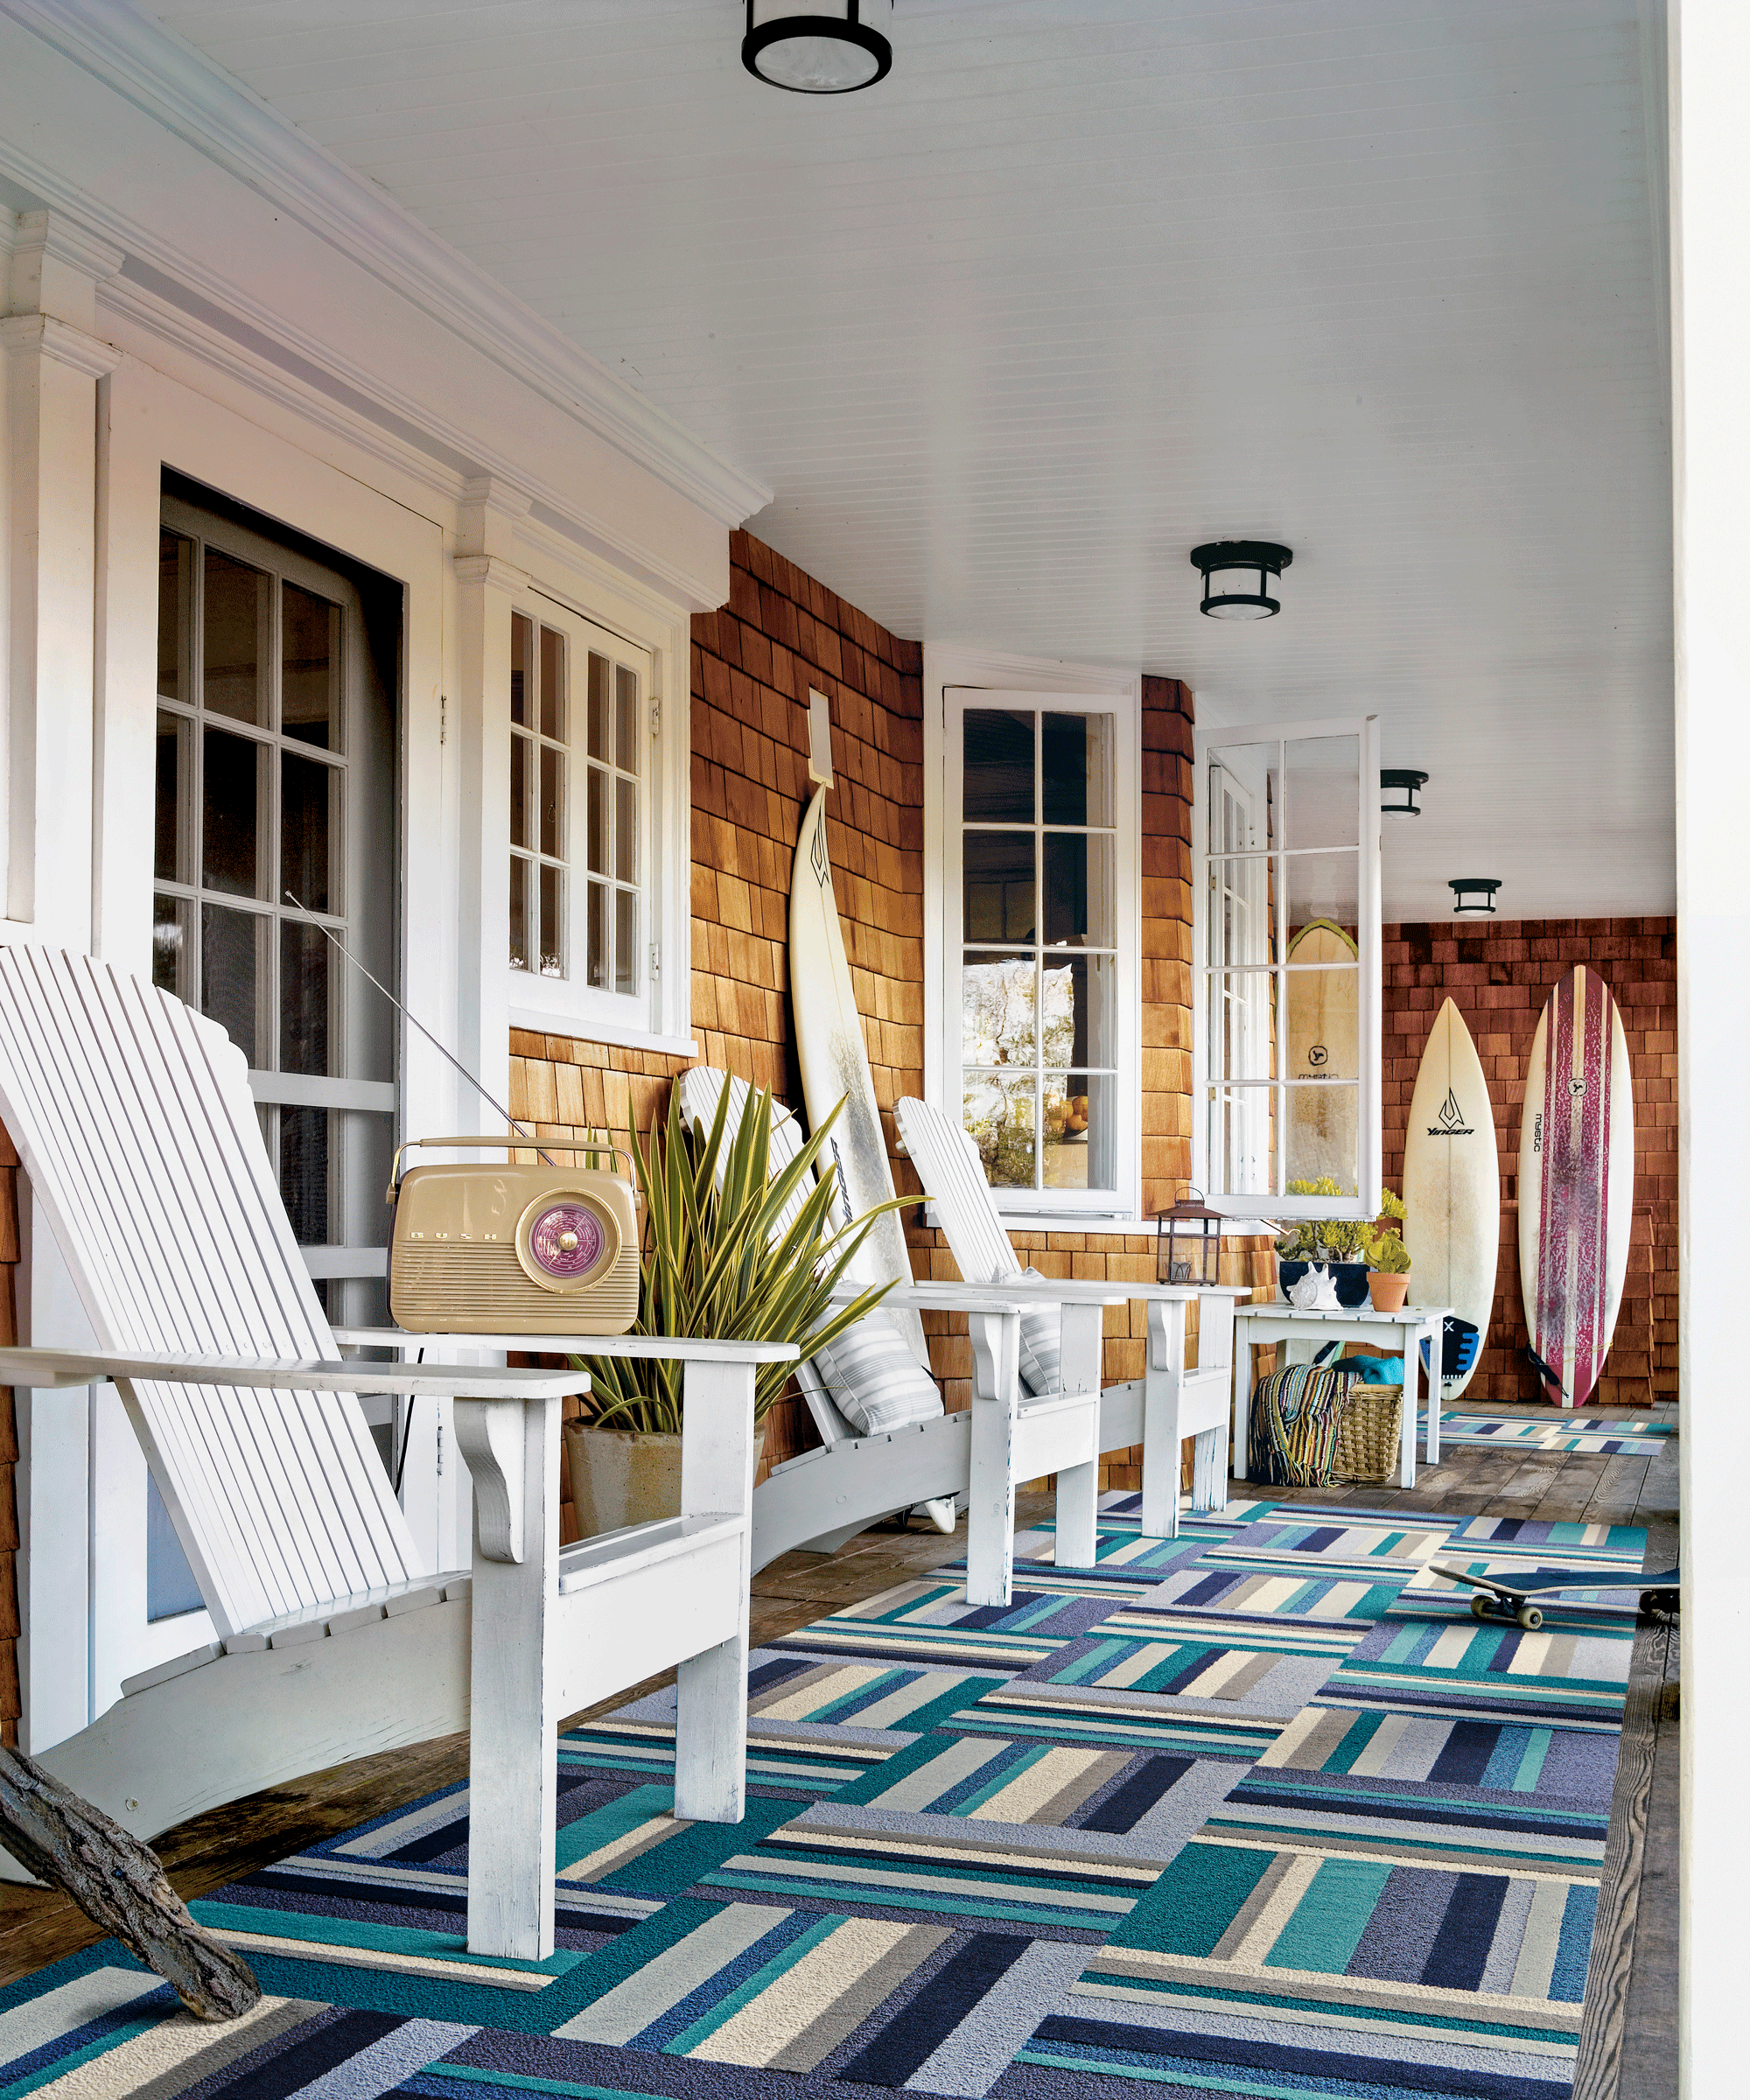 Surf inspired porch with wooden deck chairs, blue patterned rug, and surf boards.